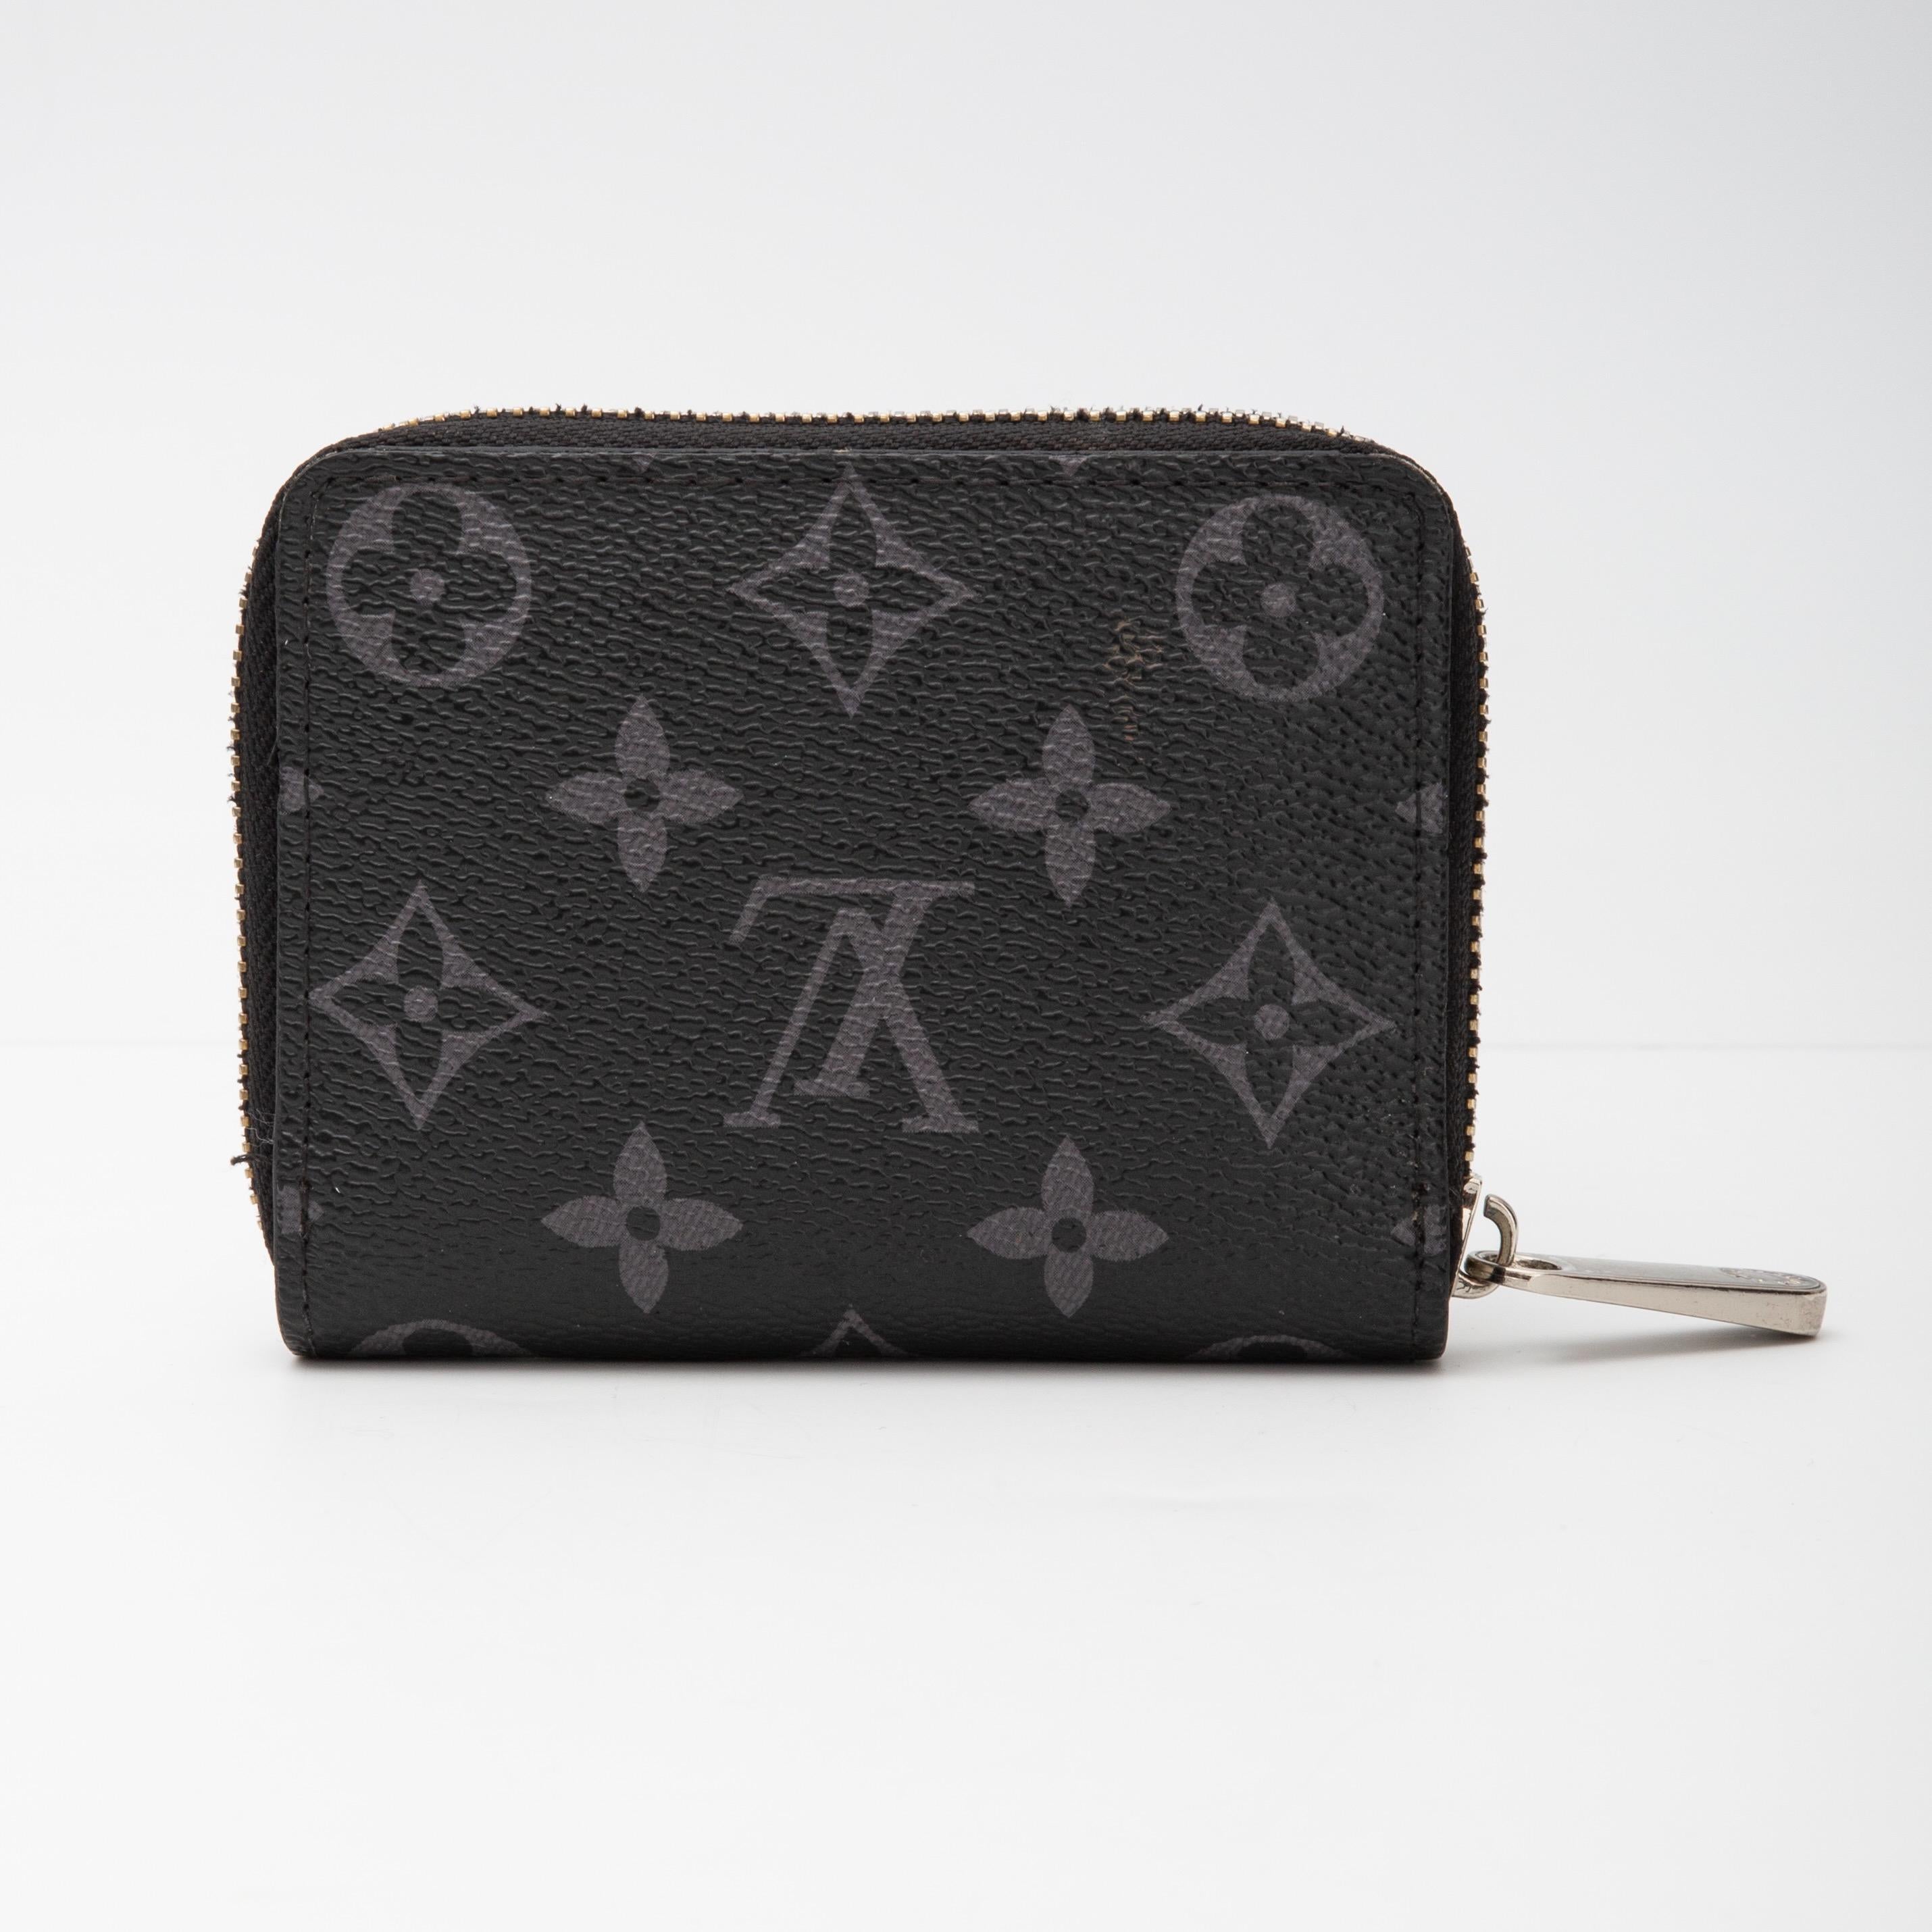 This cardholder/pouch is made of canvas in black with Louis Vuitton's signature monogram in grey. A silver wrap around zipper opens to a black cross-grain leather interior with a many card slot panels.

COLOR: Black
MATERIAL: Coated canvas
DATE